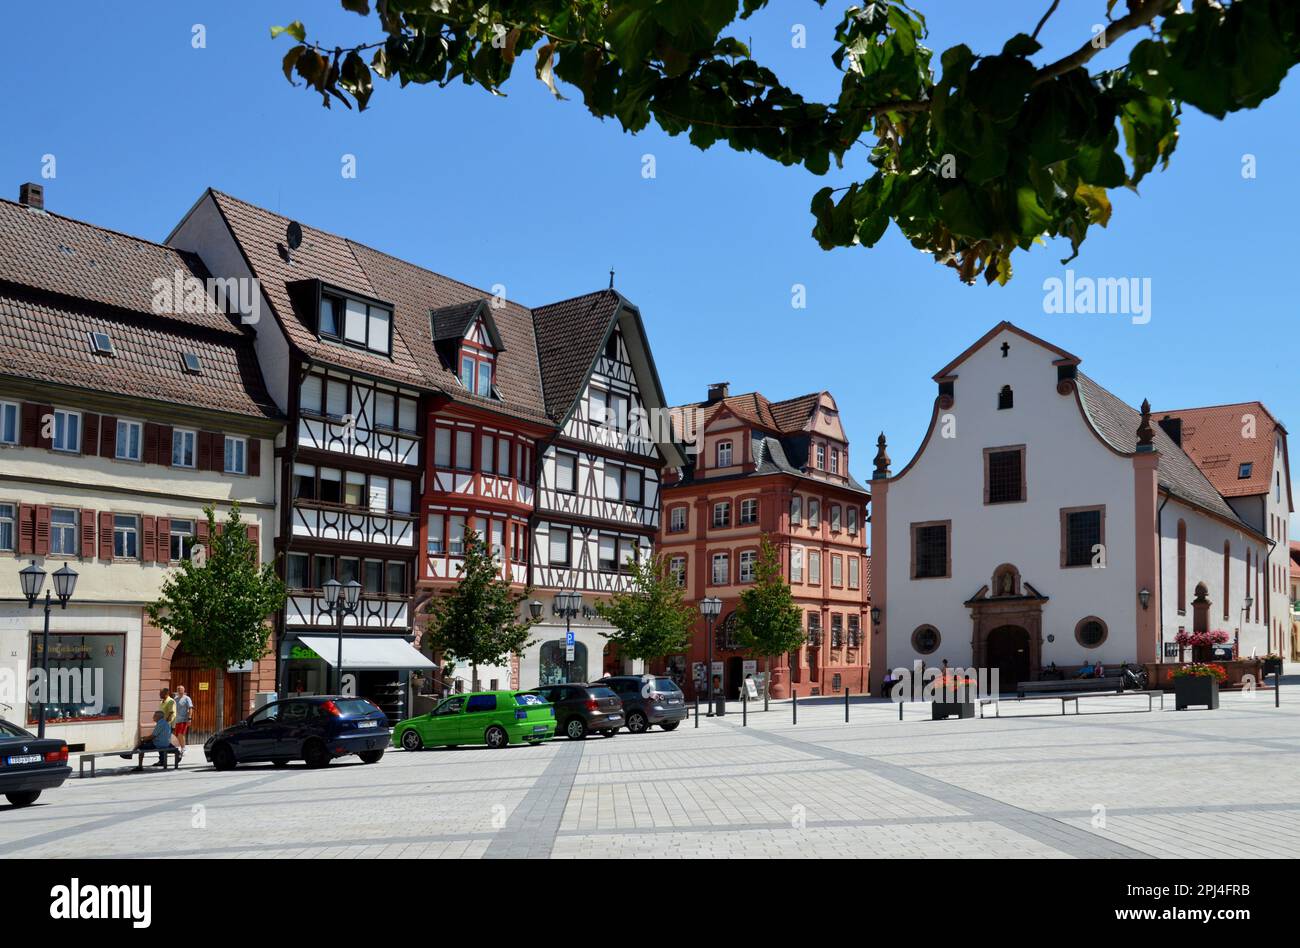 Germany, Baden-Württemberg, Tauberbischofsheim:   mediaeval timber-frame houses on the Market Place, with the Baroque church of St. Lioba at the far e Stock Photo